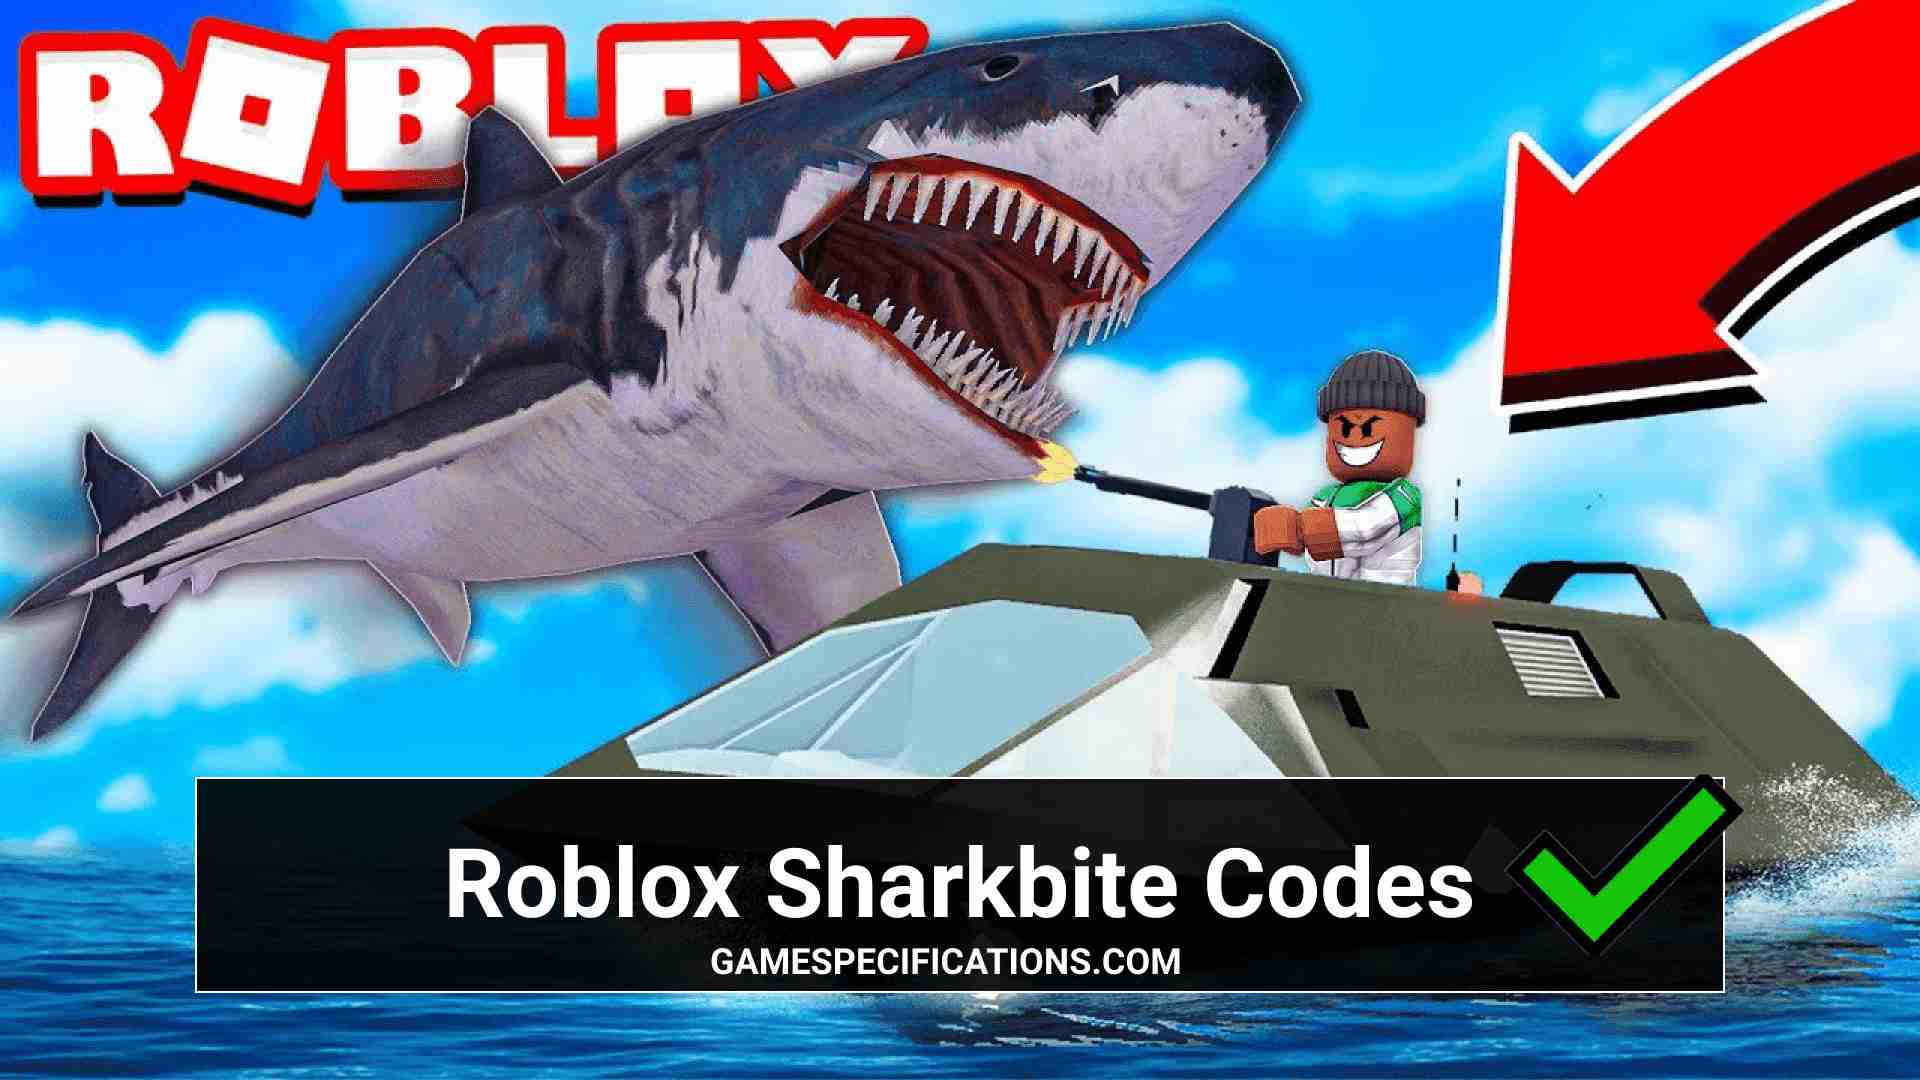 18 Roblox Sharkbite Codes To Get Free Shark Teeth July 2021 Game Specifications - roblox music id code baby shark